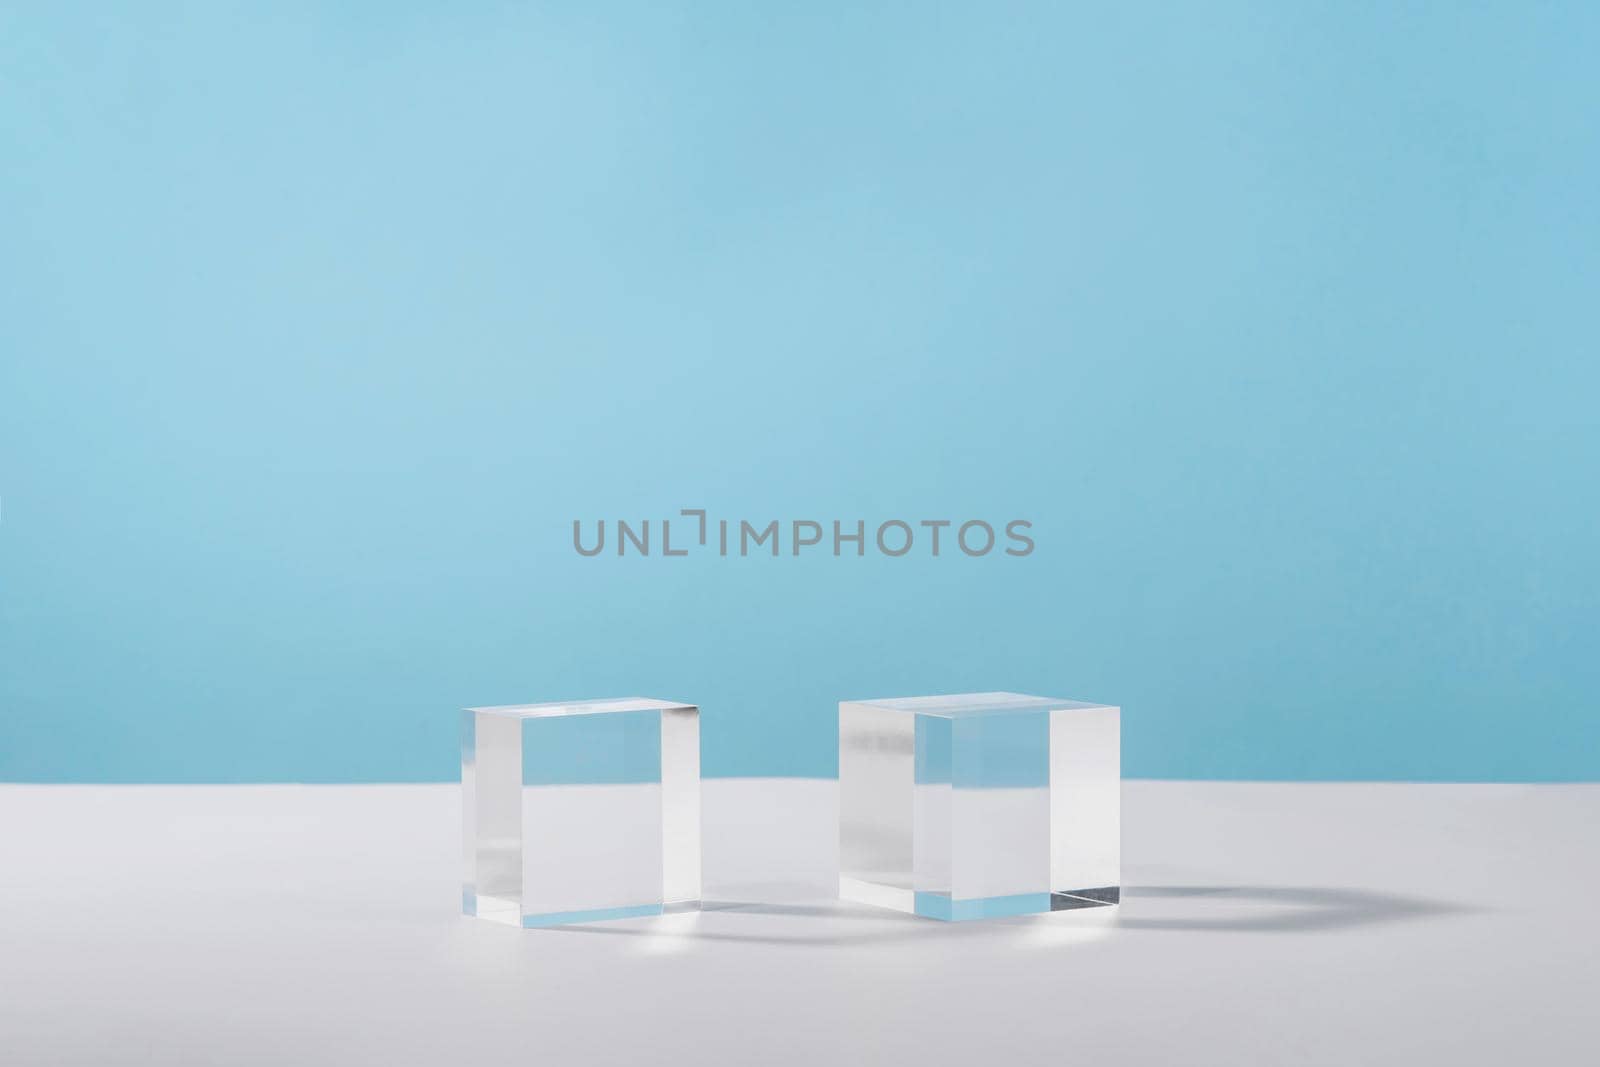 Pedestal cosmetic display glass podium platform with stylish props for product presentation, cosmetics geometric stand, mockup scene for jewellery. Acrylic blocks cubeson blue background